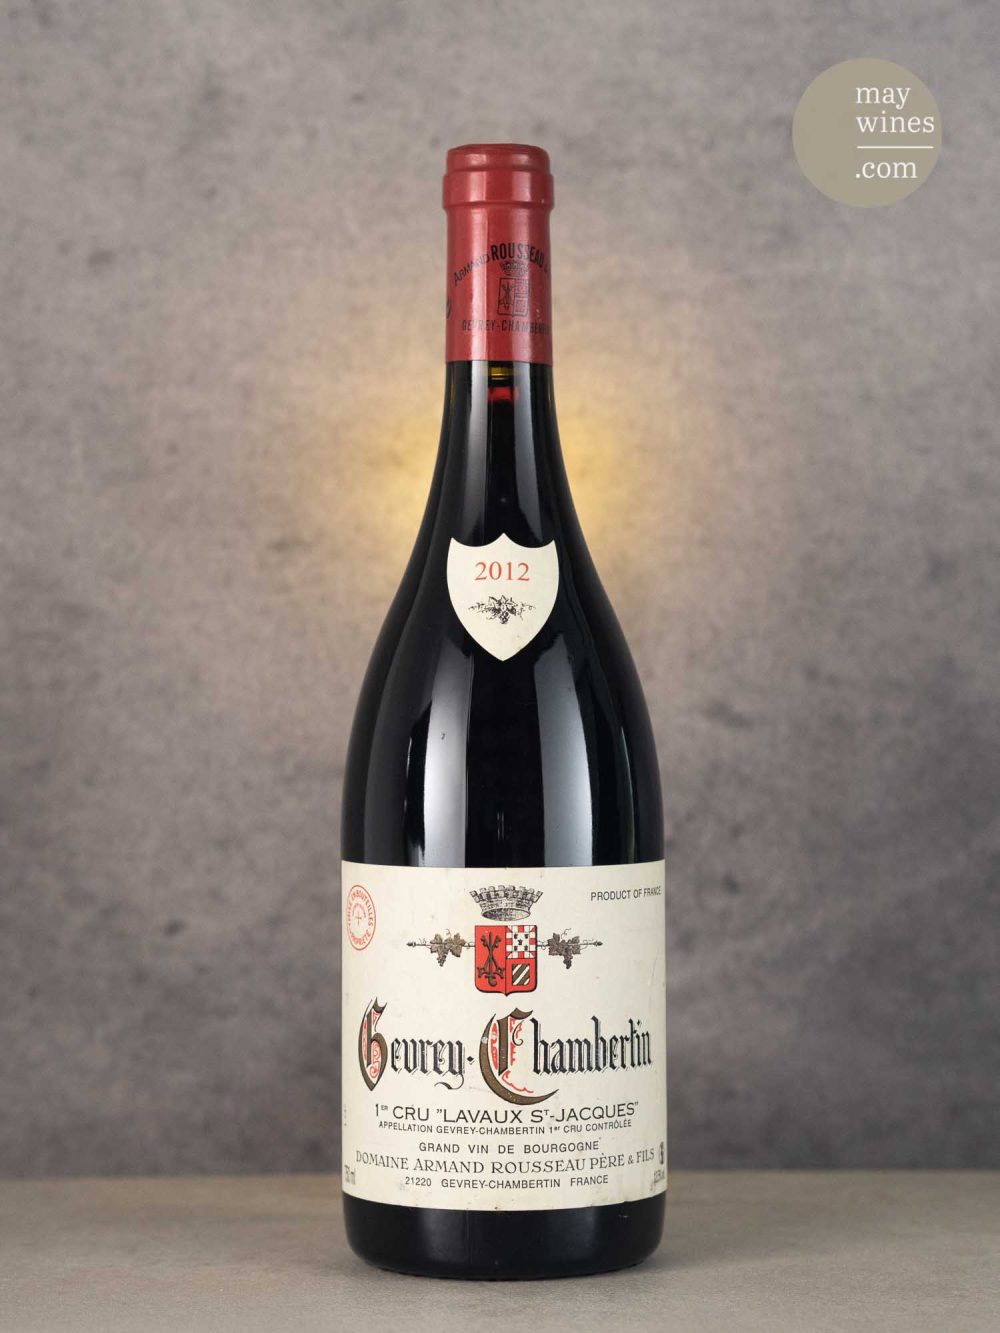 May Wines – Rotwein – 2012 Gevrey-Chambertin Lavaux St-Jacques Premier Cru - Domaine Armand Rousseau